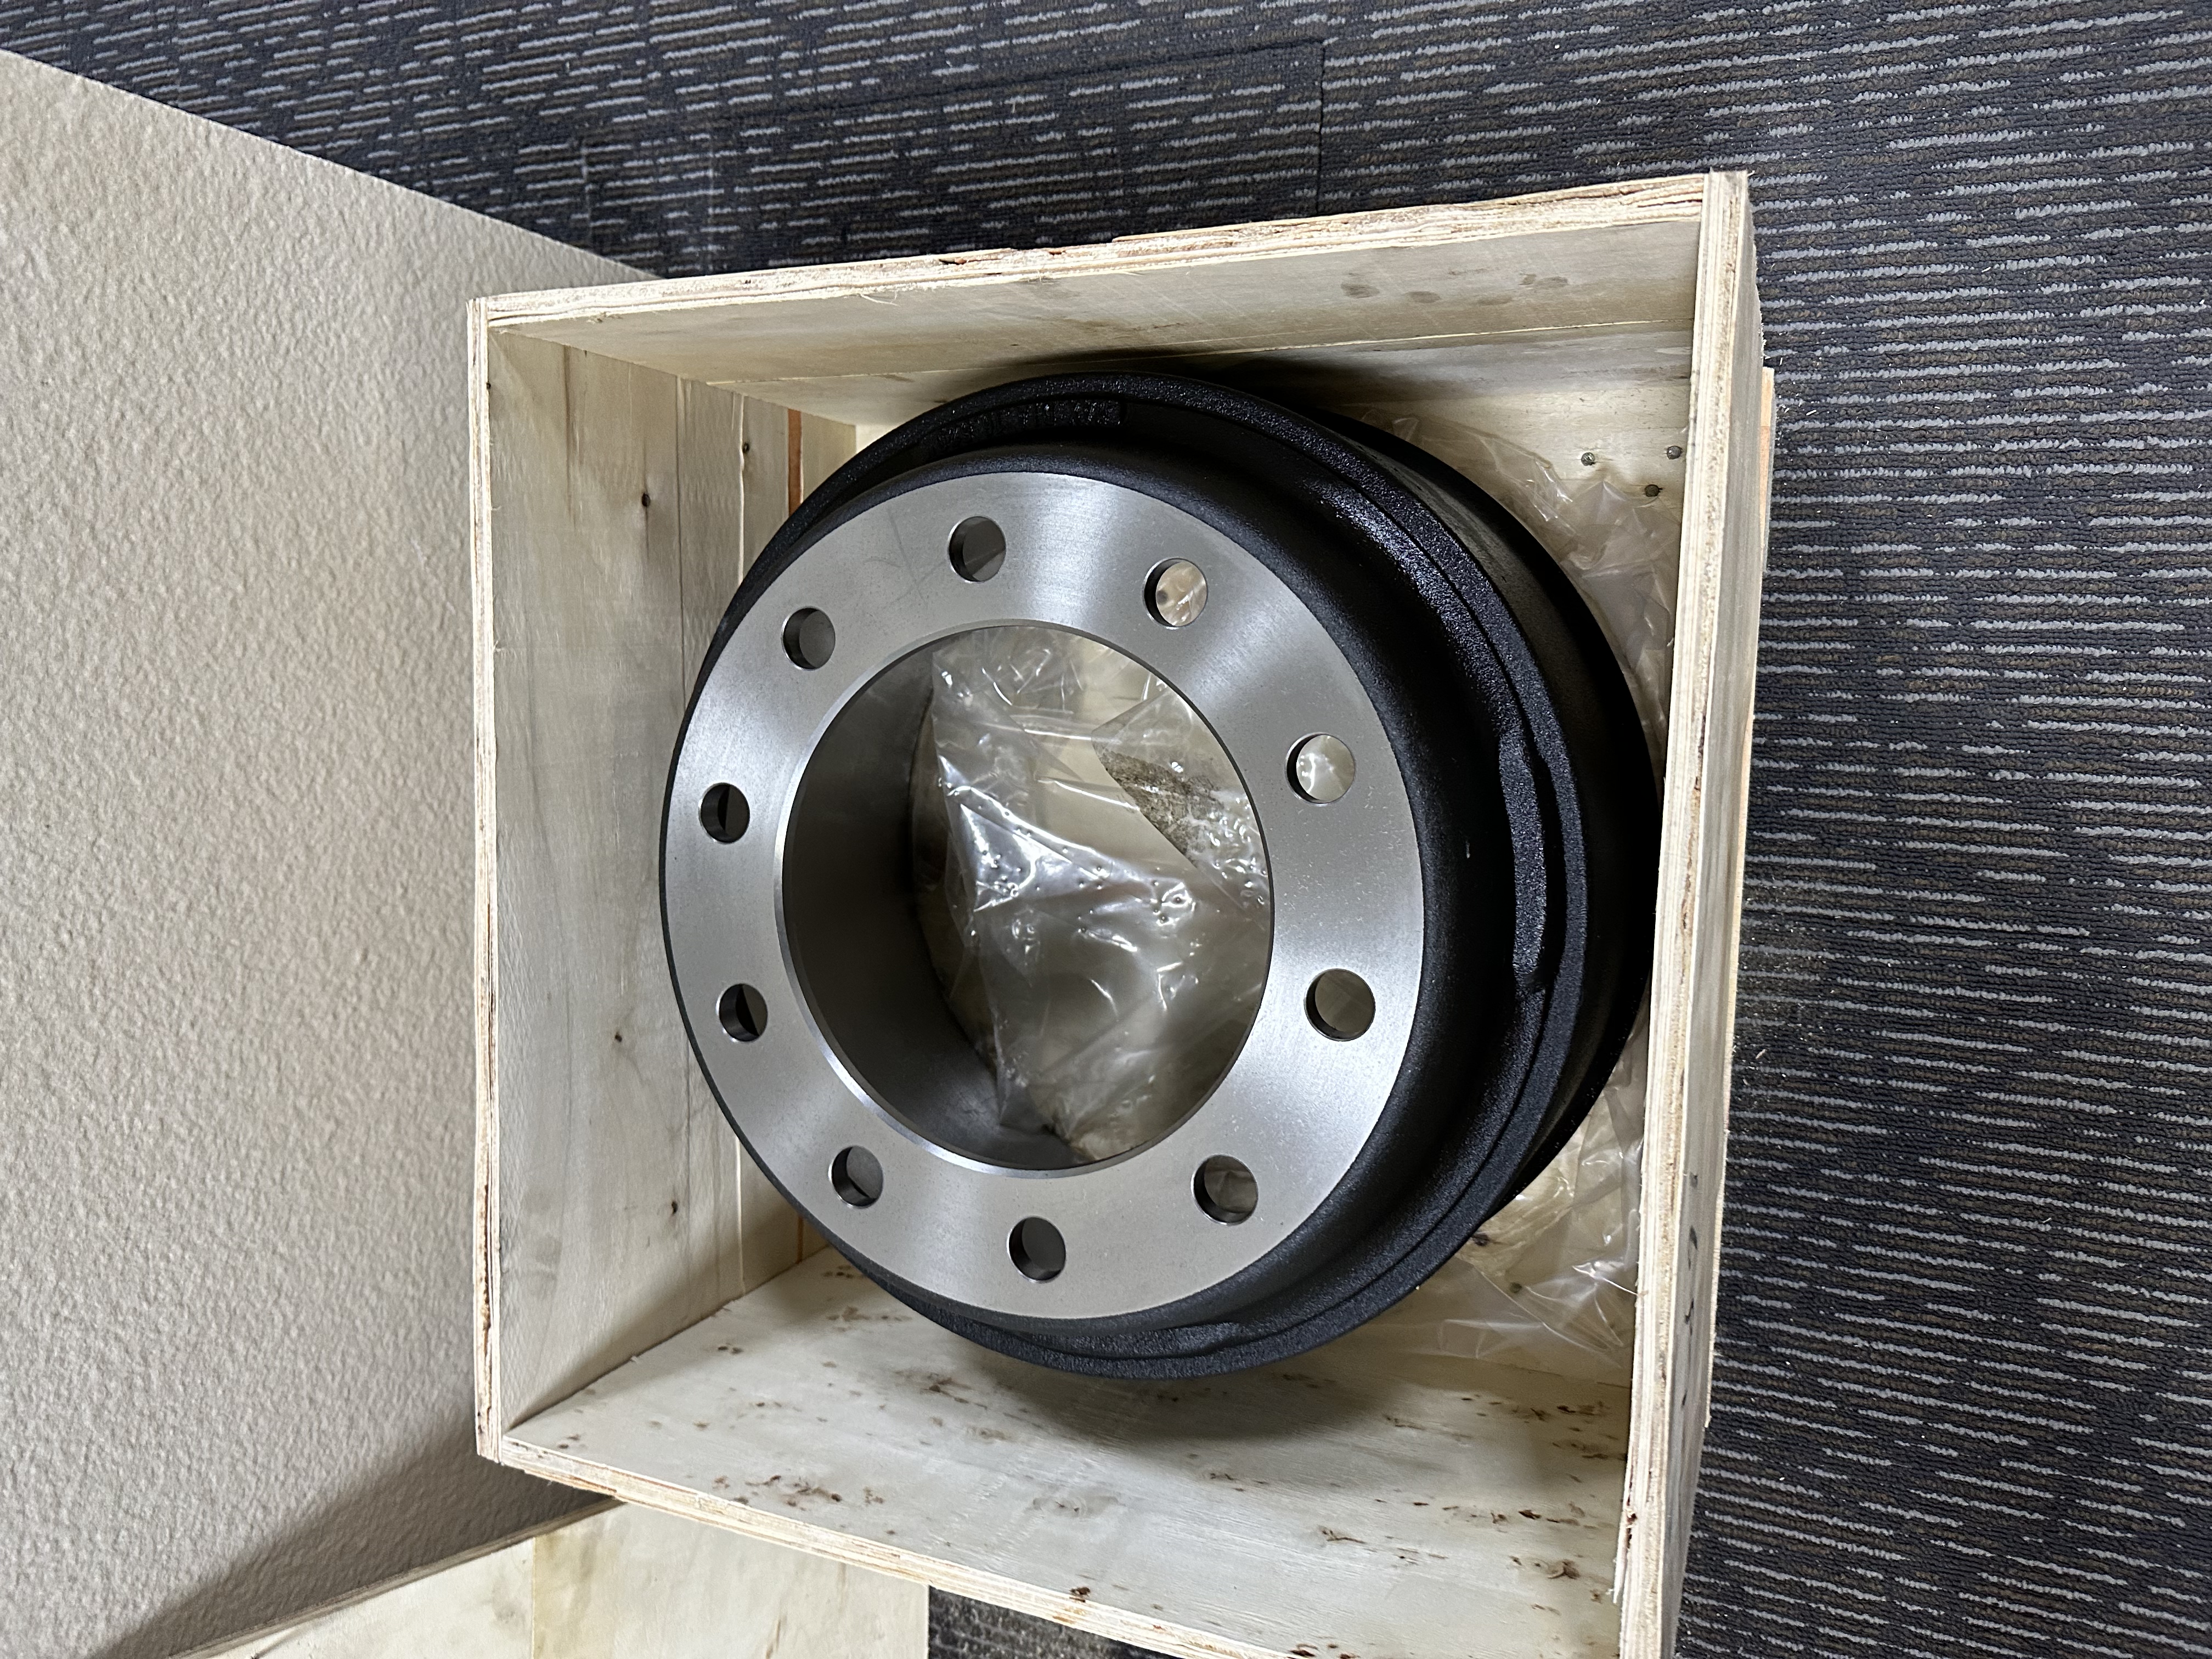 Drilling and grinding techniques for brake drums: an effective means of improving braking performance